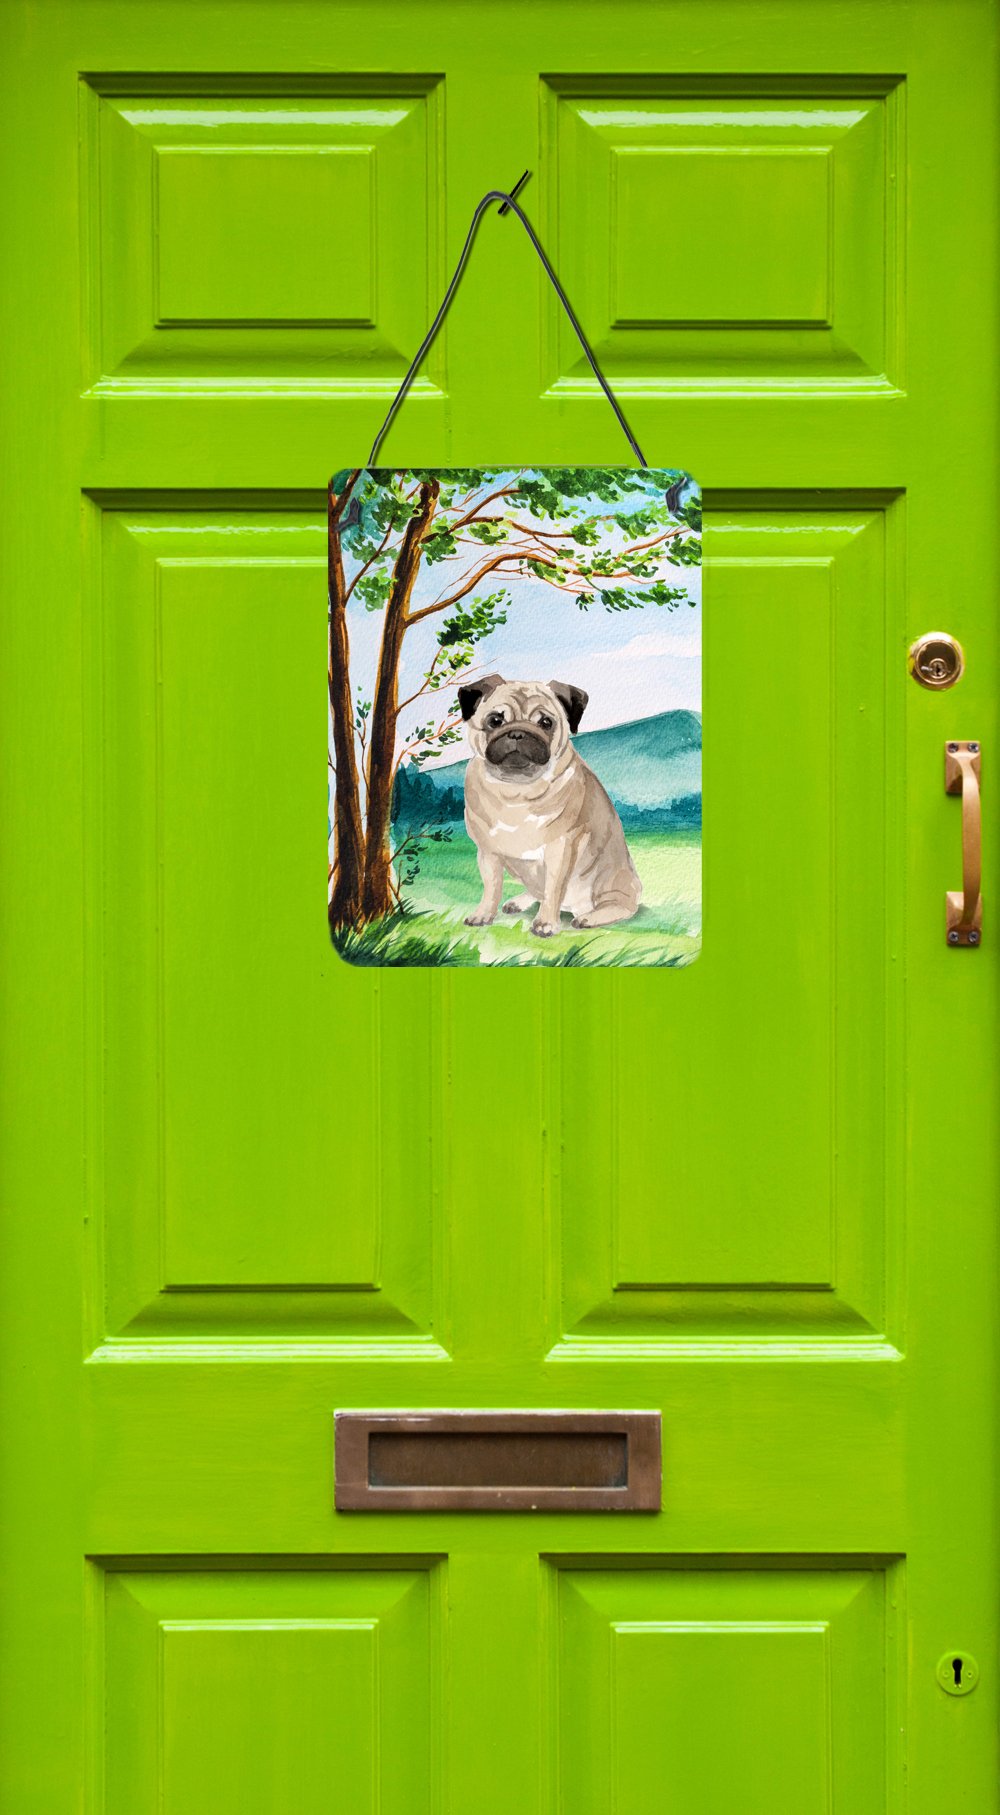 Under the Tree Fawn Pug Wall or Door Hanging Prints CK2004DS1216 by Caroline's Treasures